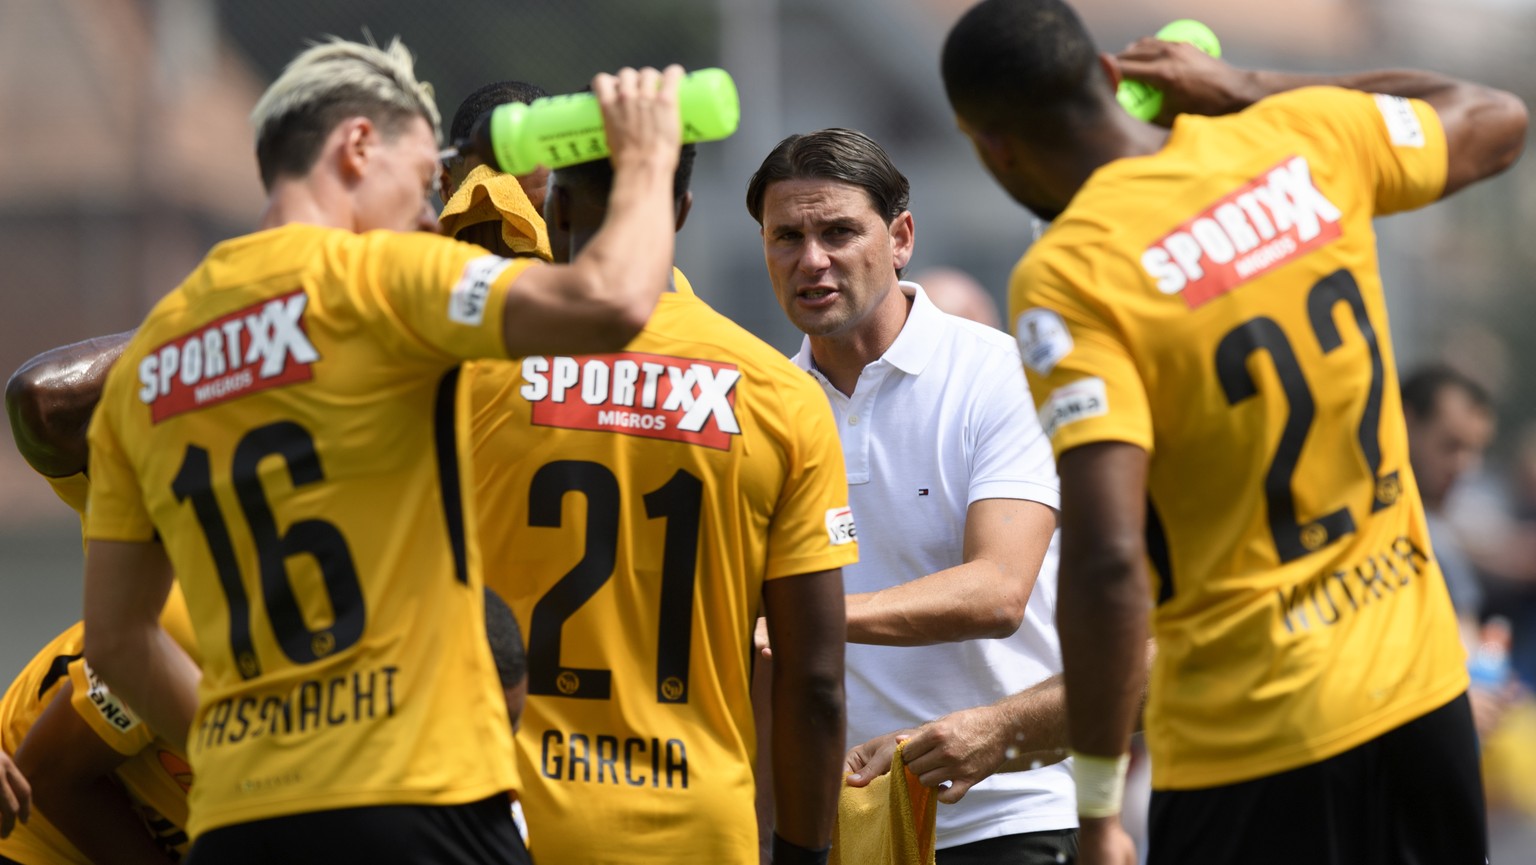 YB Cheftrainer Gerry Seoane, speaks with his players during a friendly soccer match of the international Uhrencup tournament between Switzerland&#039;s BSC Young Boys and England&#039;s Wolverhampton  ...